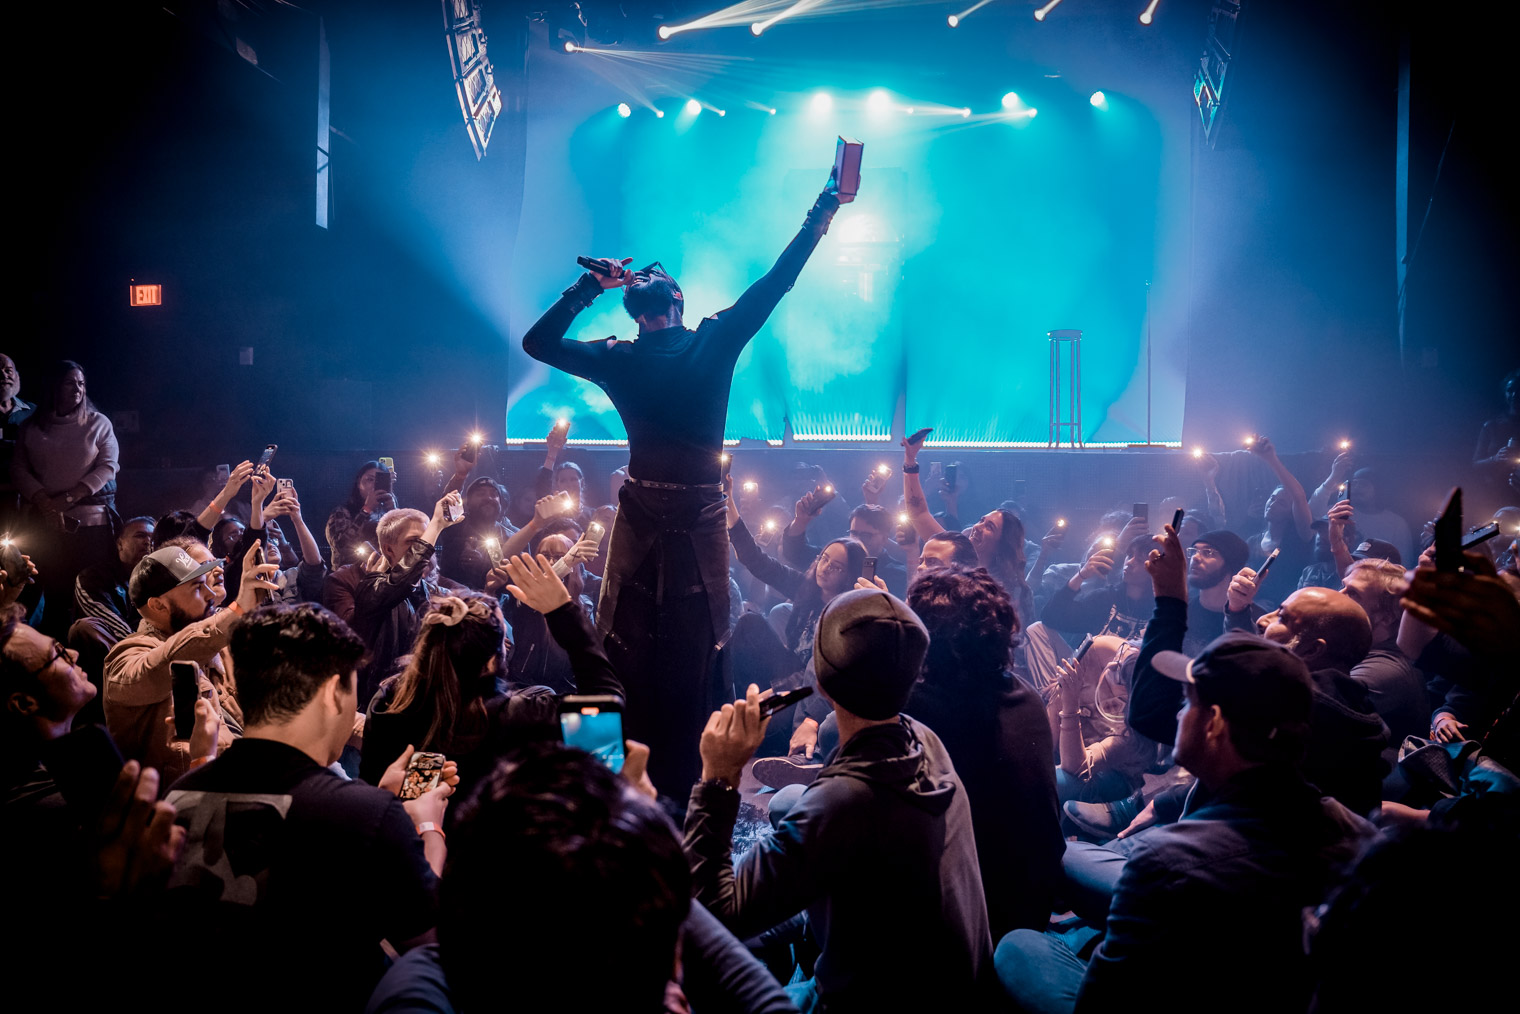 A singer surrounded by an audience sitting on the floor with their phone lights lit